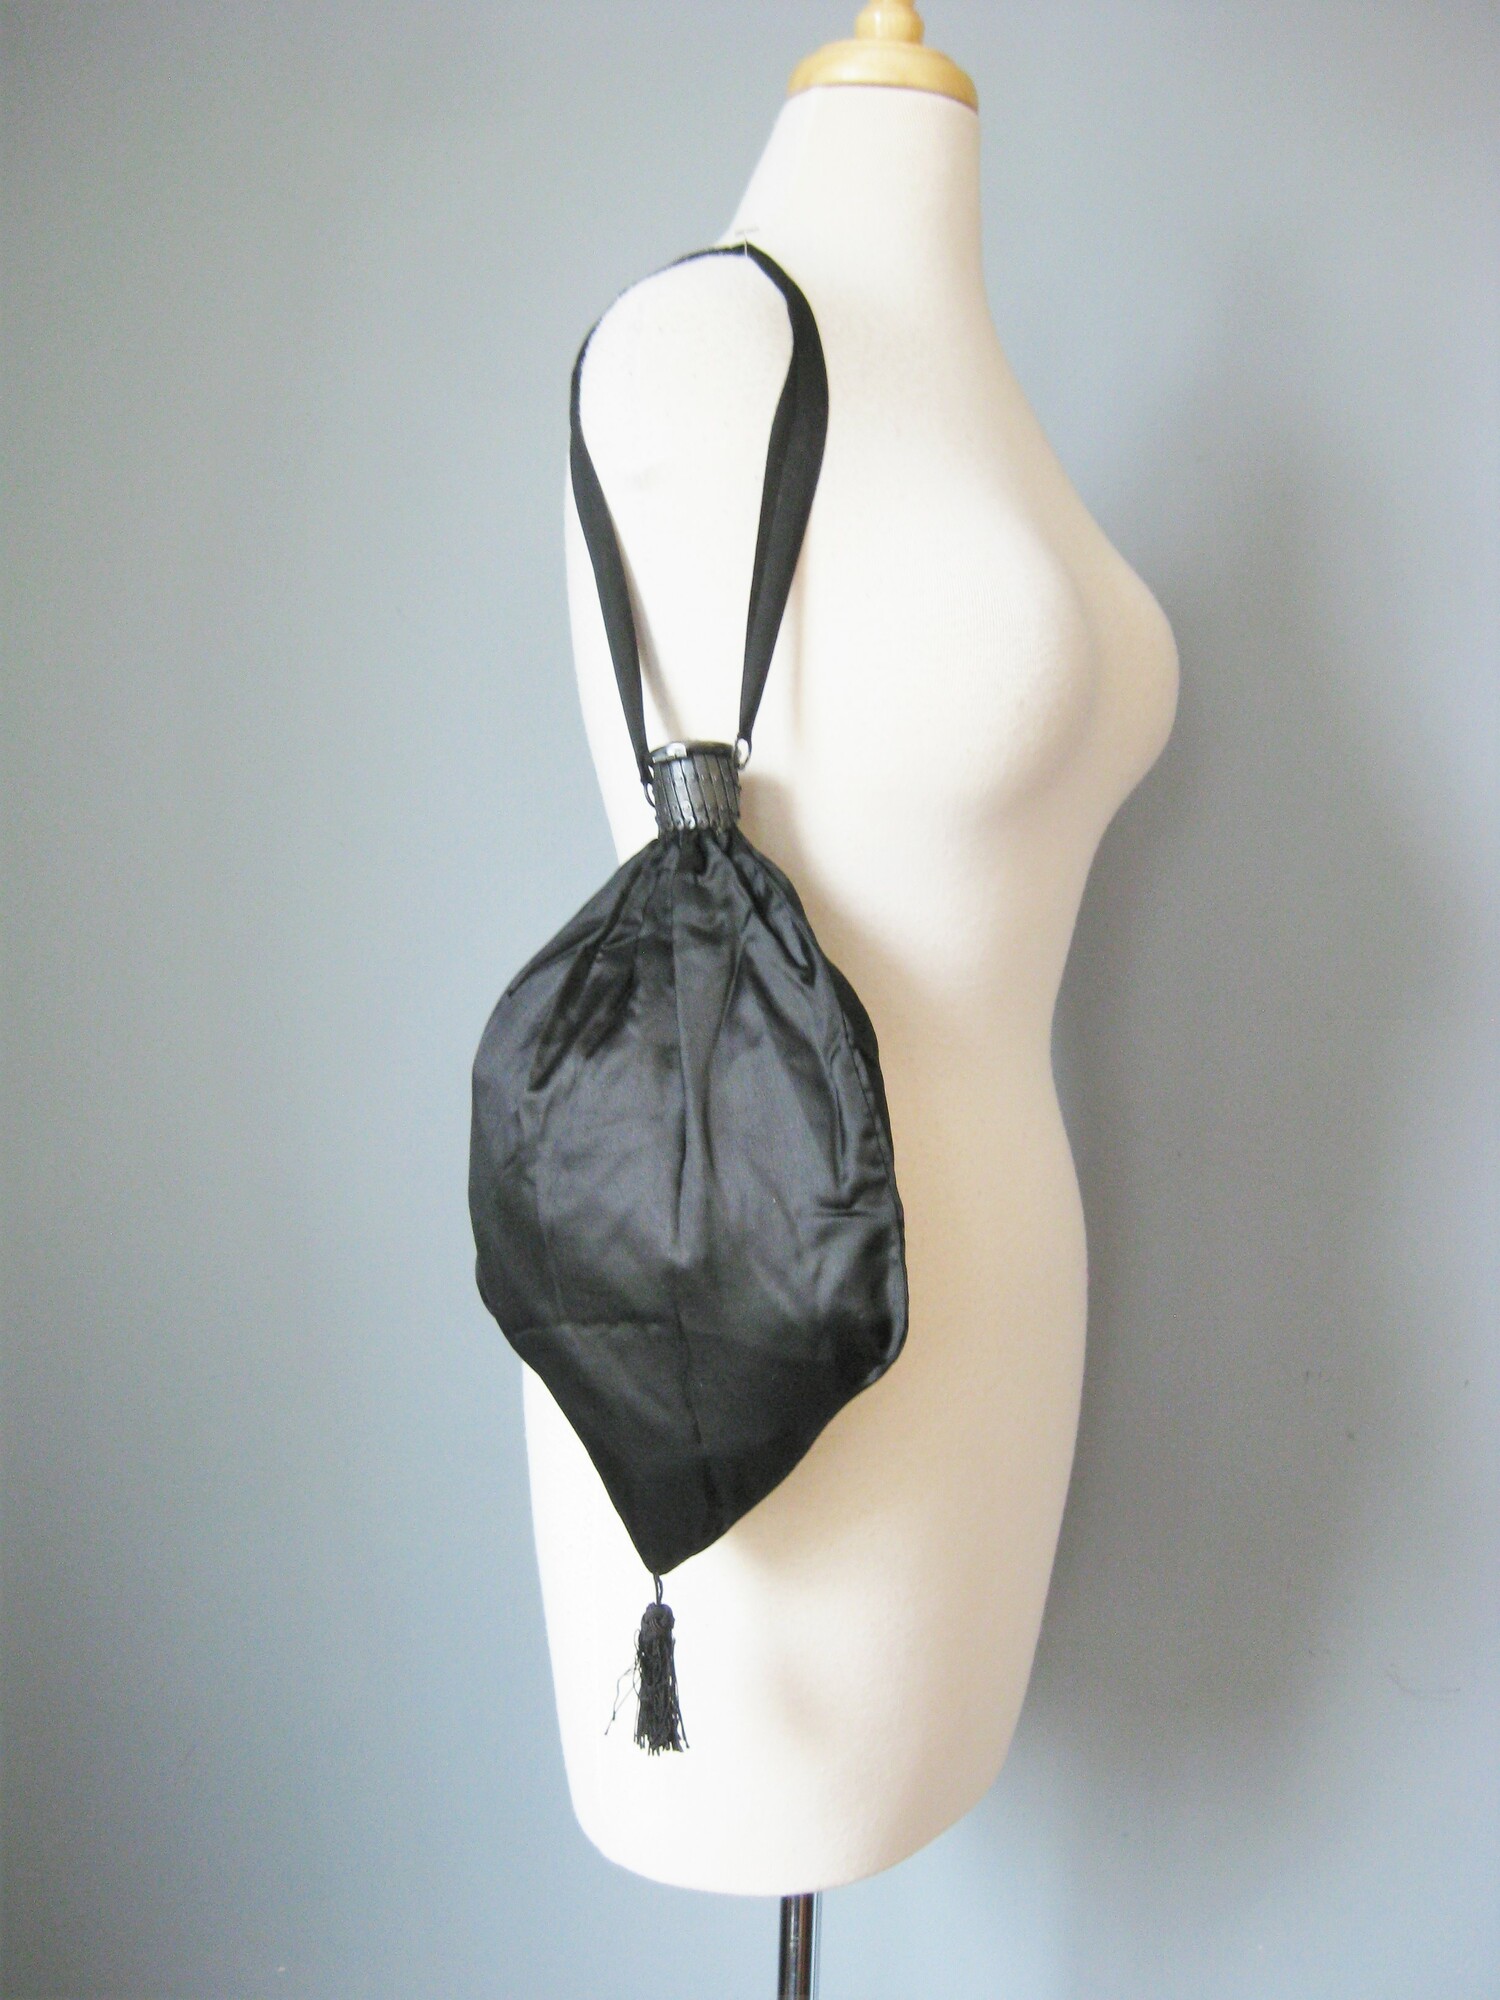 Very old silk purse, probably used as part of a Victorian or Edwardian mourning ensemble.
This back is black with black satin ribbons and a metal expanding frame.
The frame is topped with an open work metal cap with rhinestones.
It has a dangling tassel at the bottom.
The frame opens to reveal a dark lavender silk lining.
Handmade.

Amazing condition! no flaws

10 wide at its widest point
13 long/tall
8 long
12 around

thanks for looking!
#47337